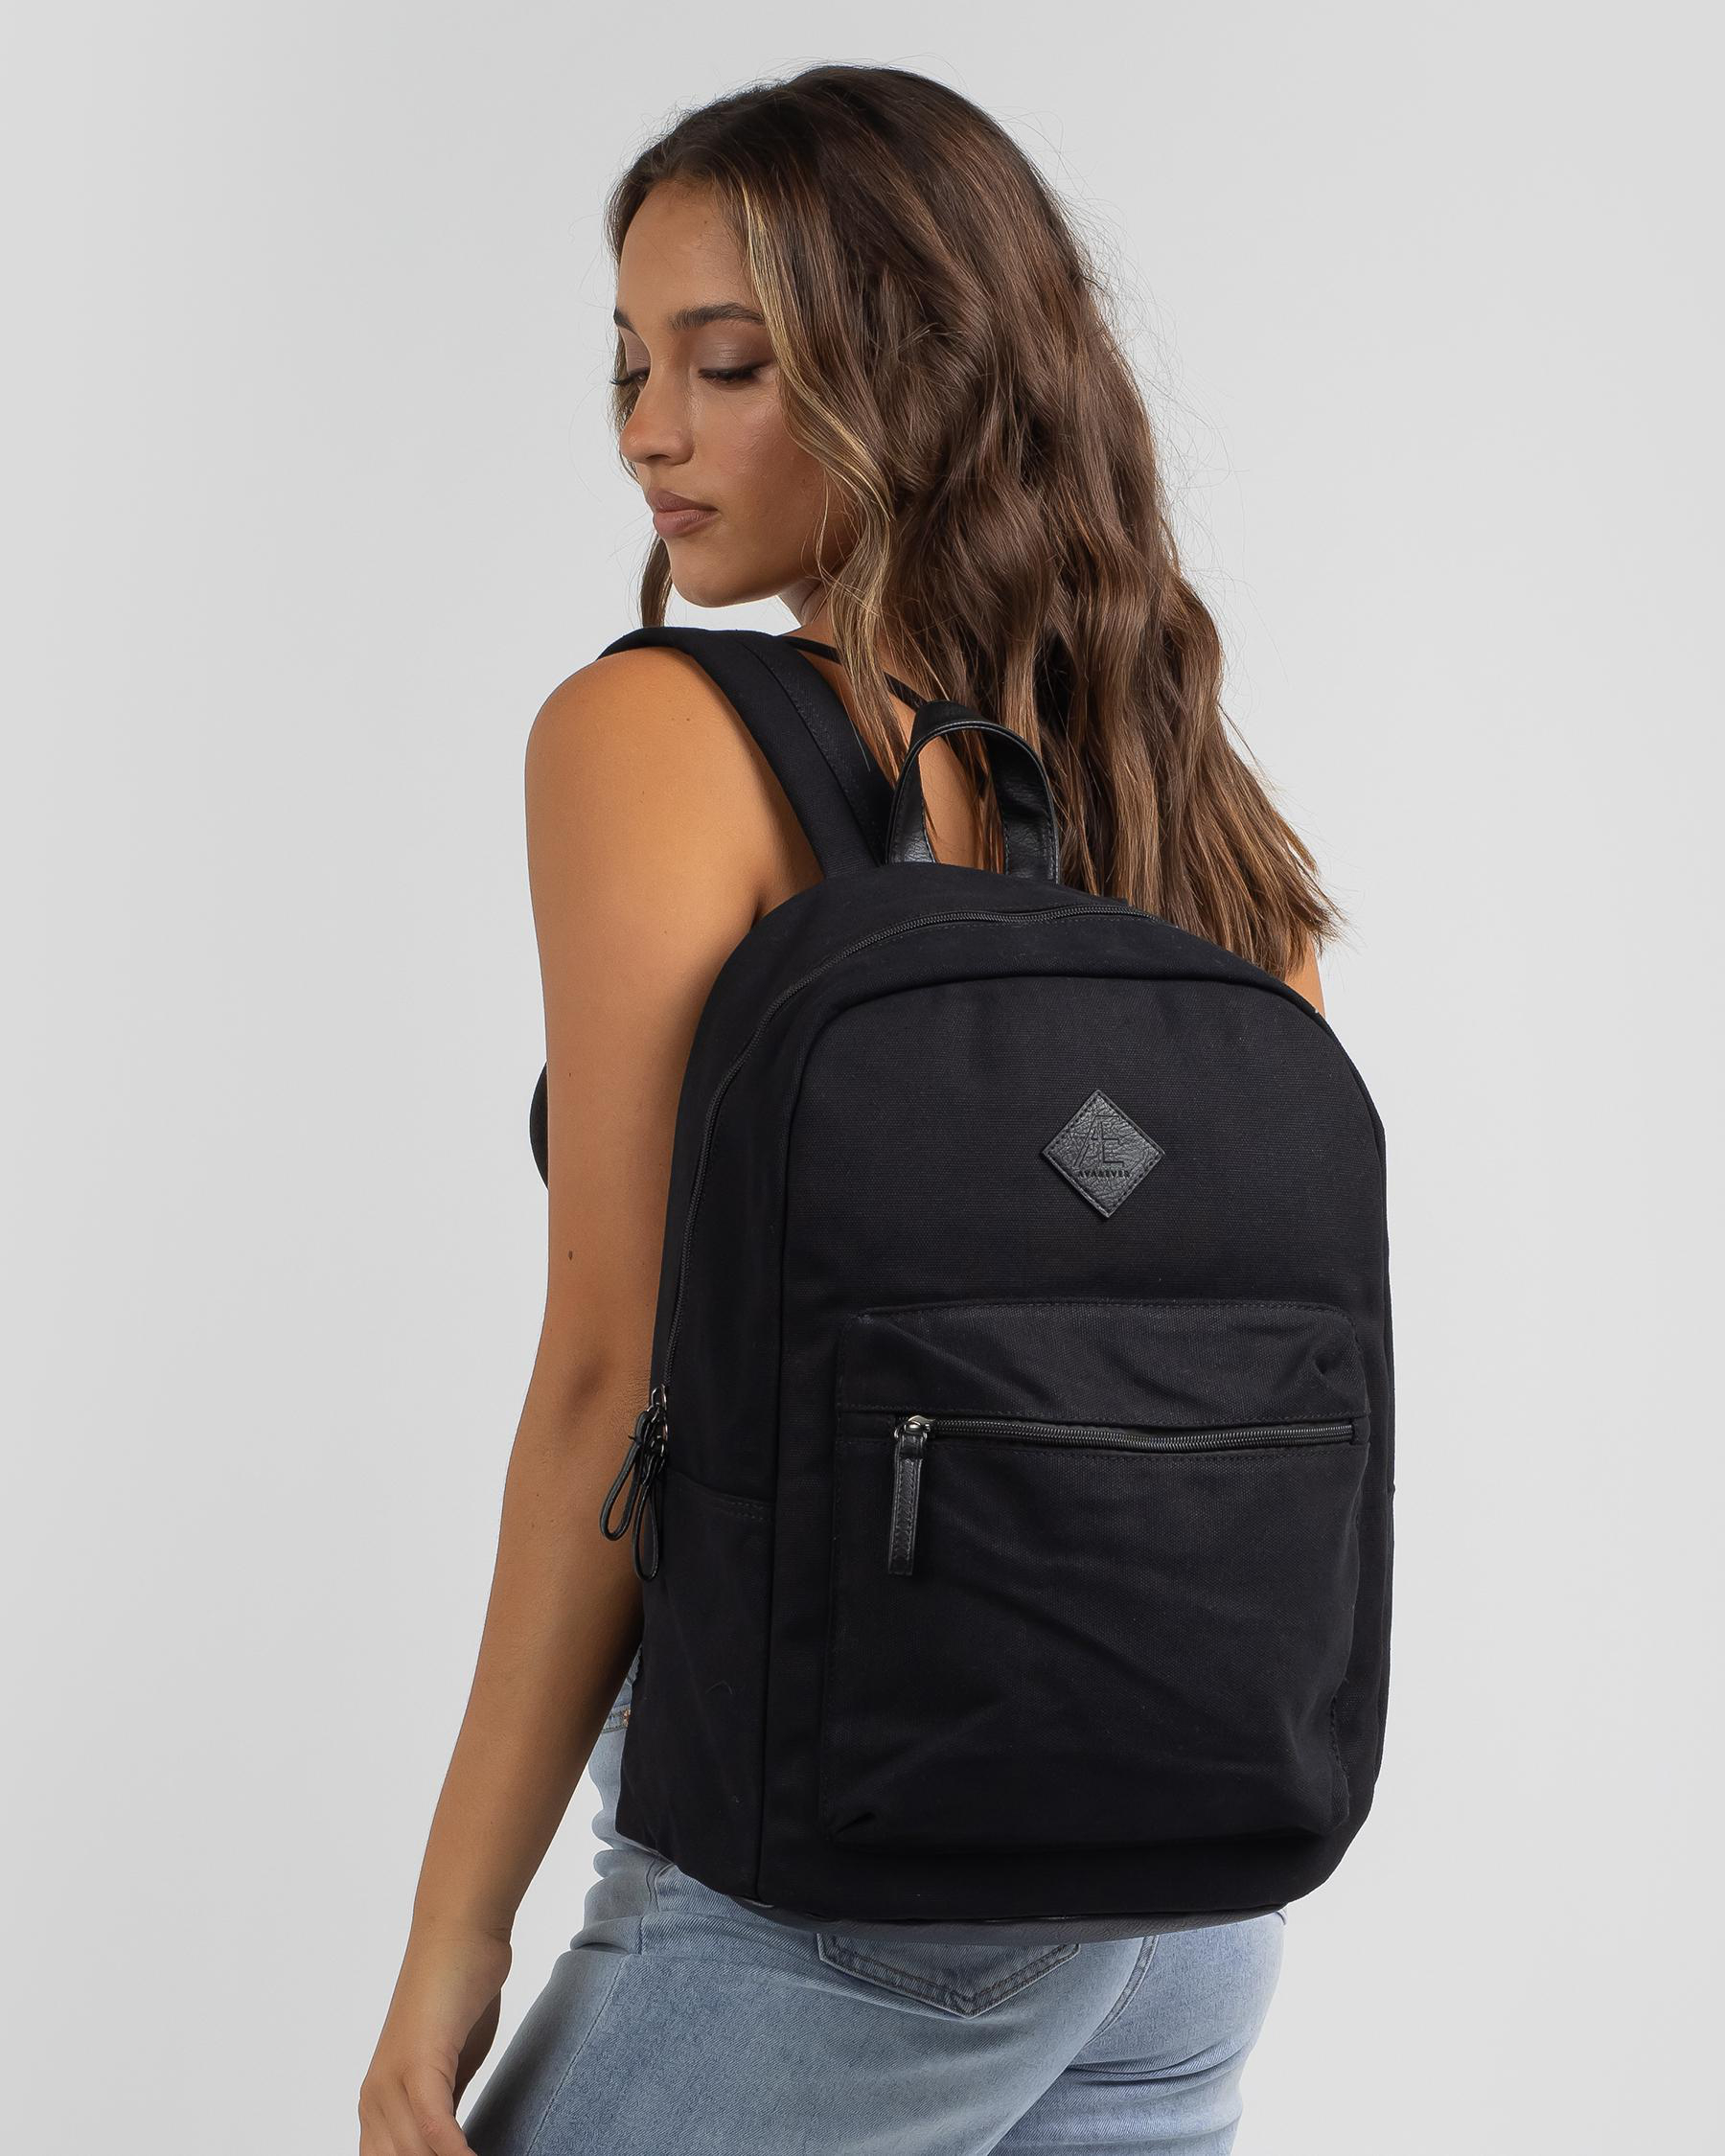 Ava And Ever Twilight Backpack In Black/black - Fast Shipping & Easy ...